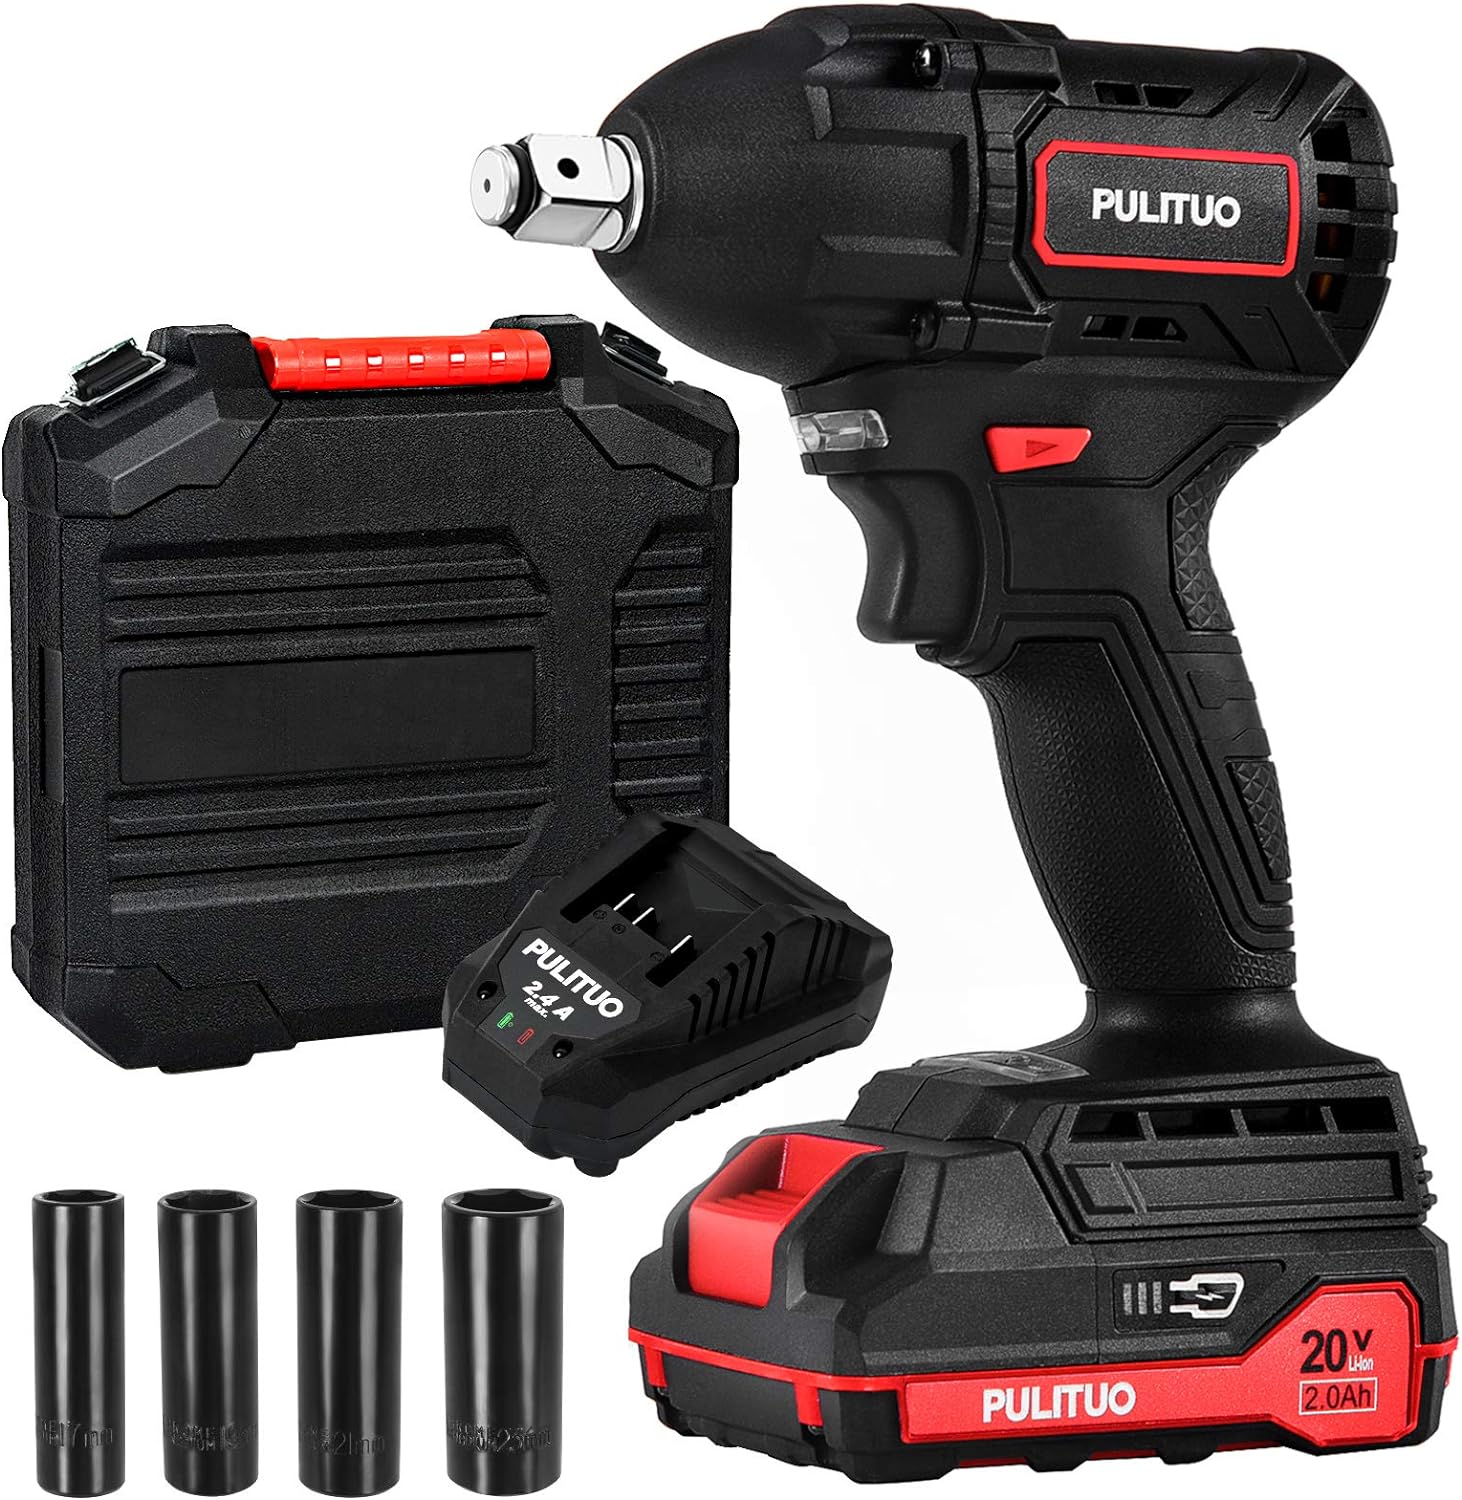 PULITUO Impact Wrench 1/2 Inch Chuck,  20V Brushless Cordless Impact Wrench with 2.0Ah Li-Ion Battery and Charger, Max Torque 400N.m, 4